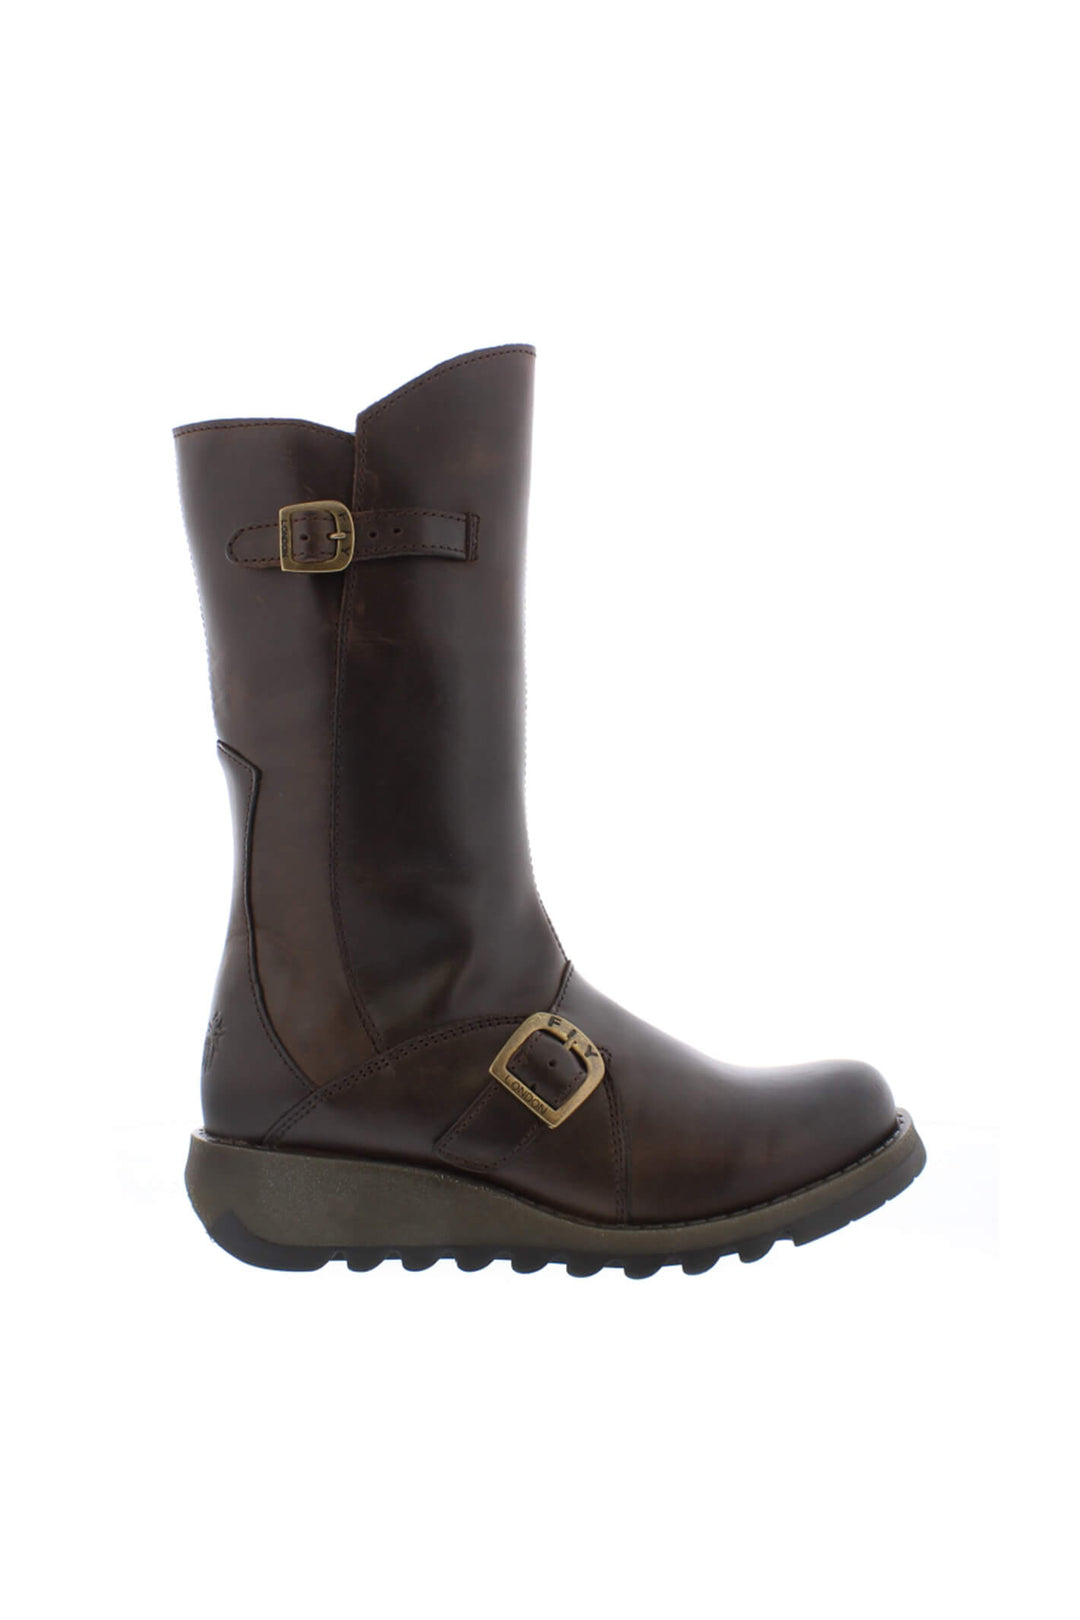 Fly London Shoes Mes 2 Rug P142913 Brown Boot - Shirley Allum Boutique